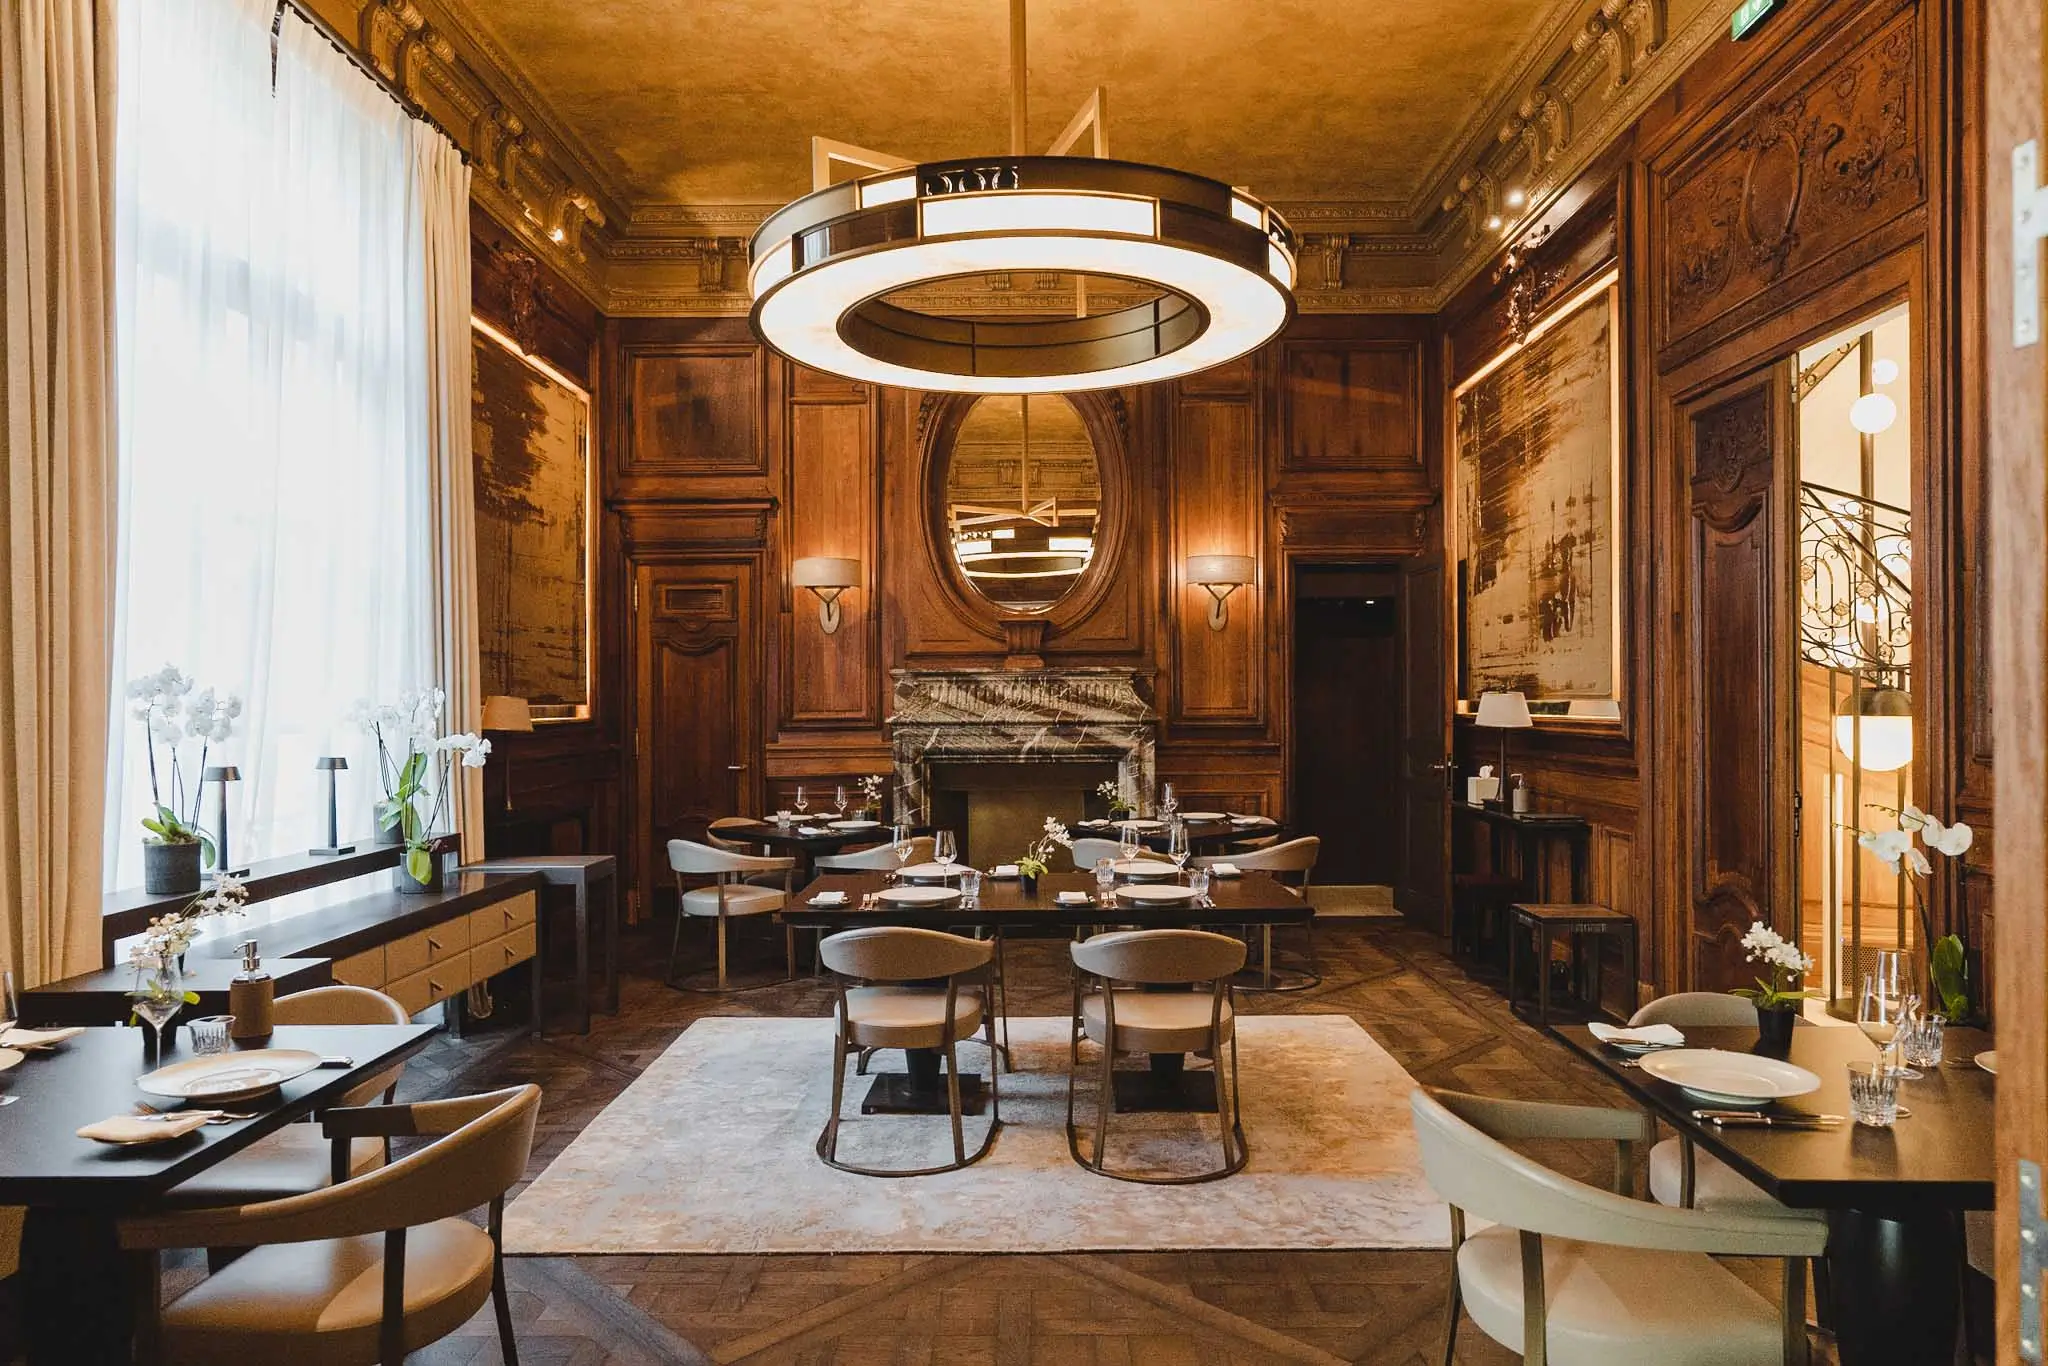 Luxurious dining room with wooden paneling and large chandelier at Restaurant Trente-Trois, a Michelin Star restaurant in Paris.